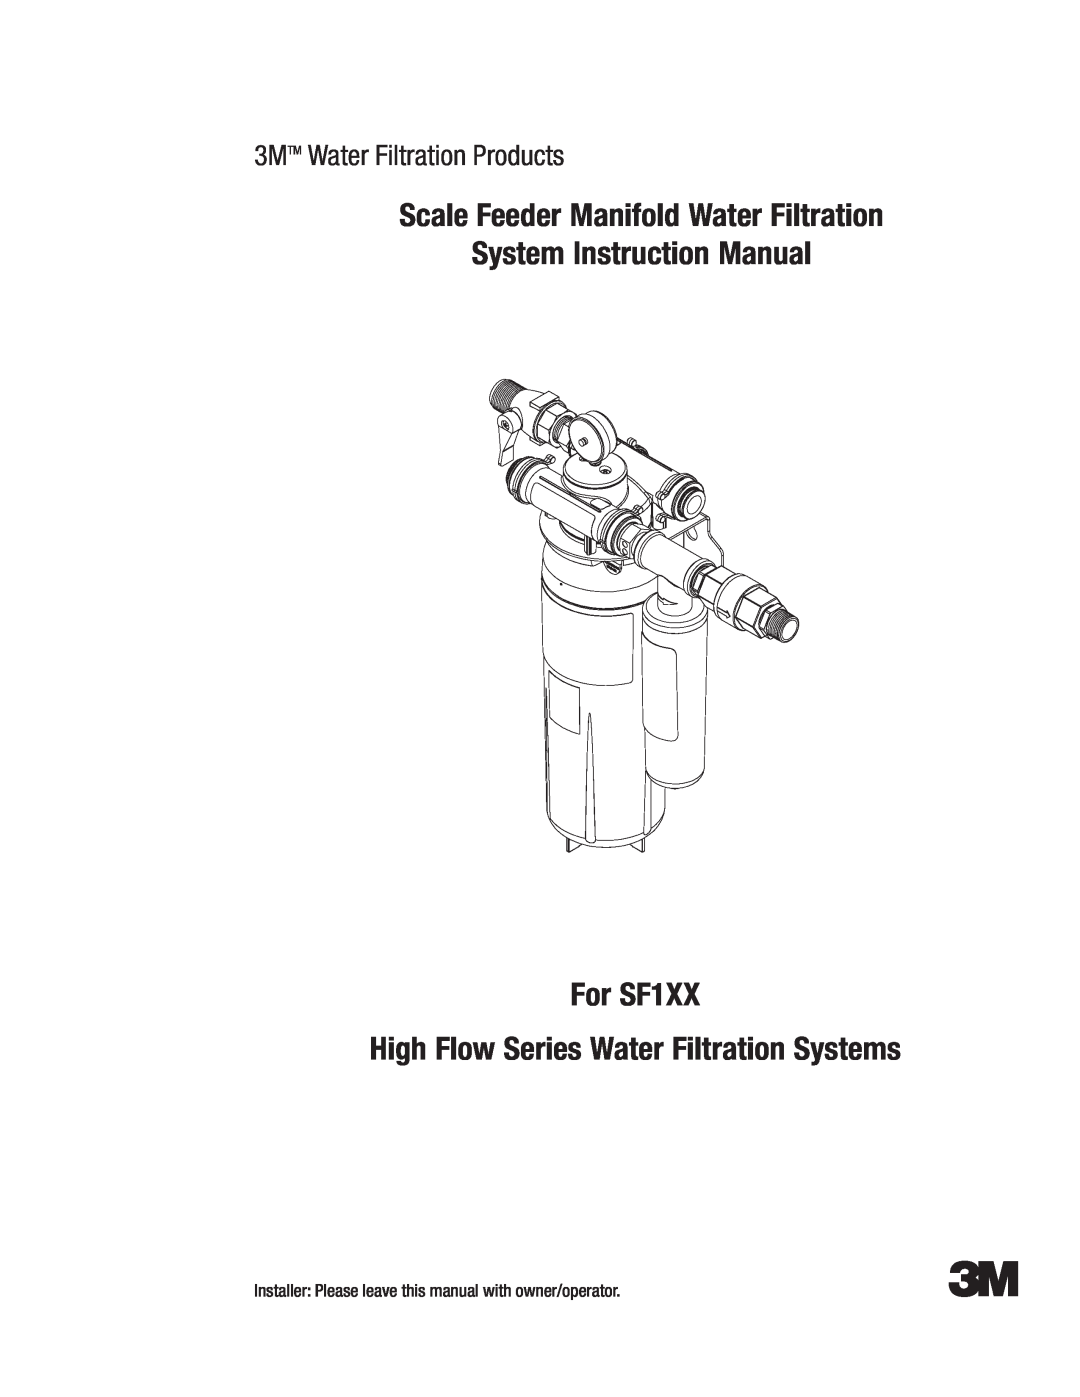 3M instruction manual 3MTM Water Filtration Products, For SF1XX High Flow Series Water Filtration Systems 